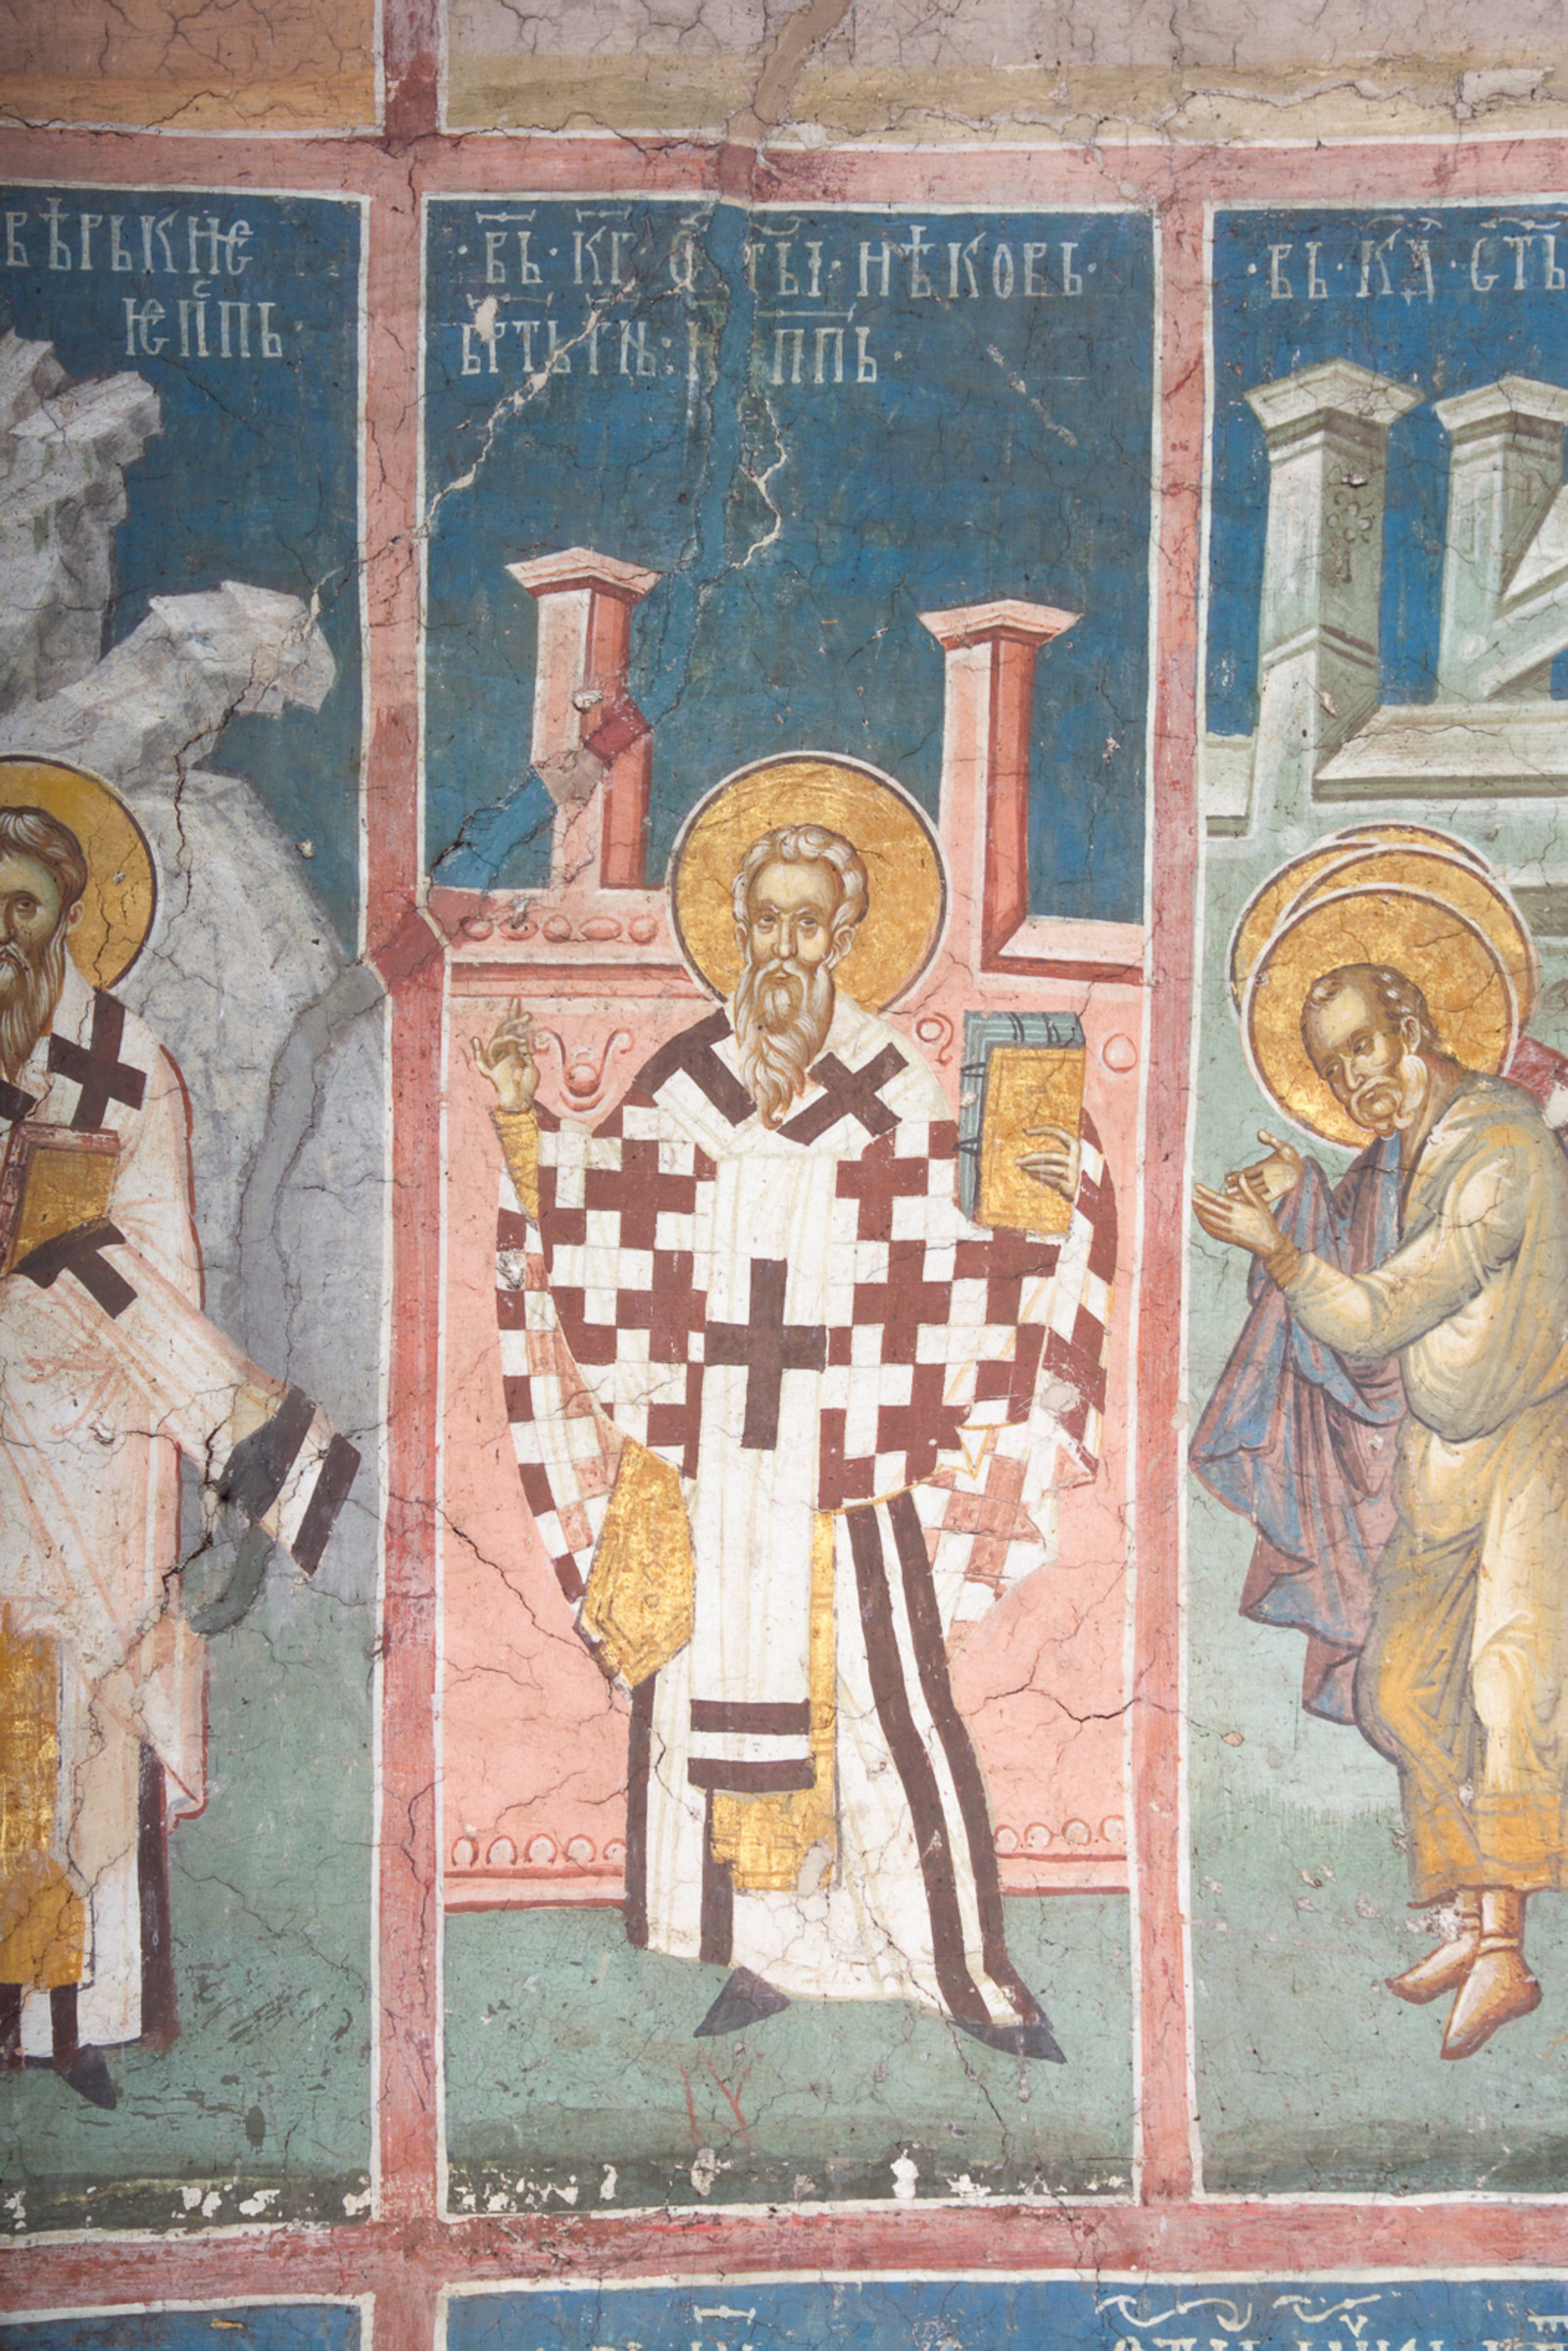 7II-35 October 23 - St. James the brother of God (figure)